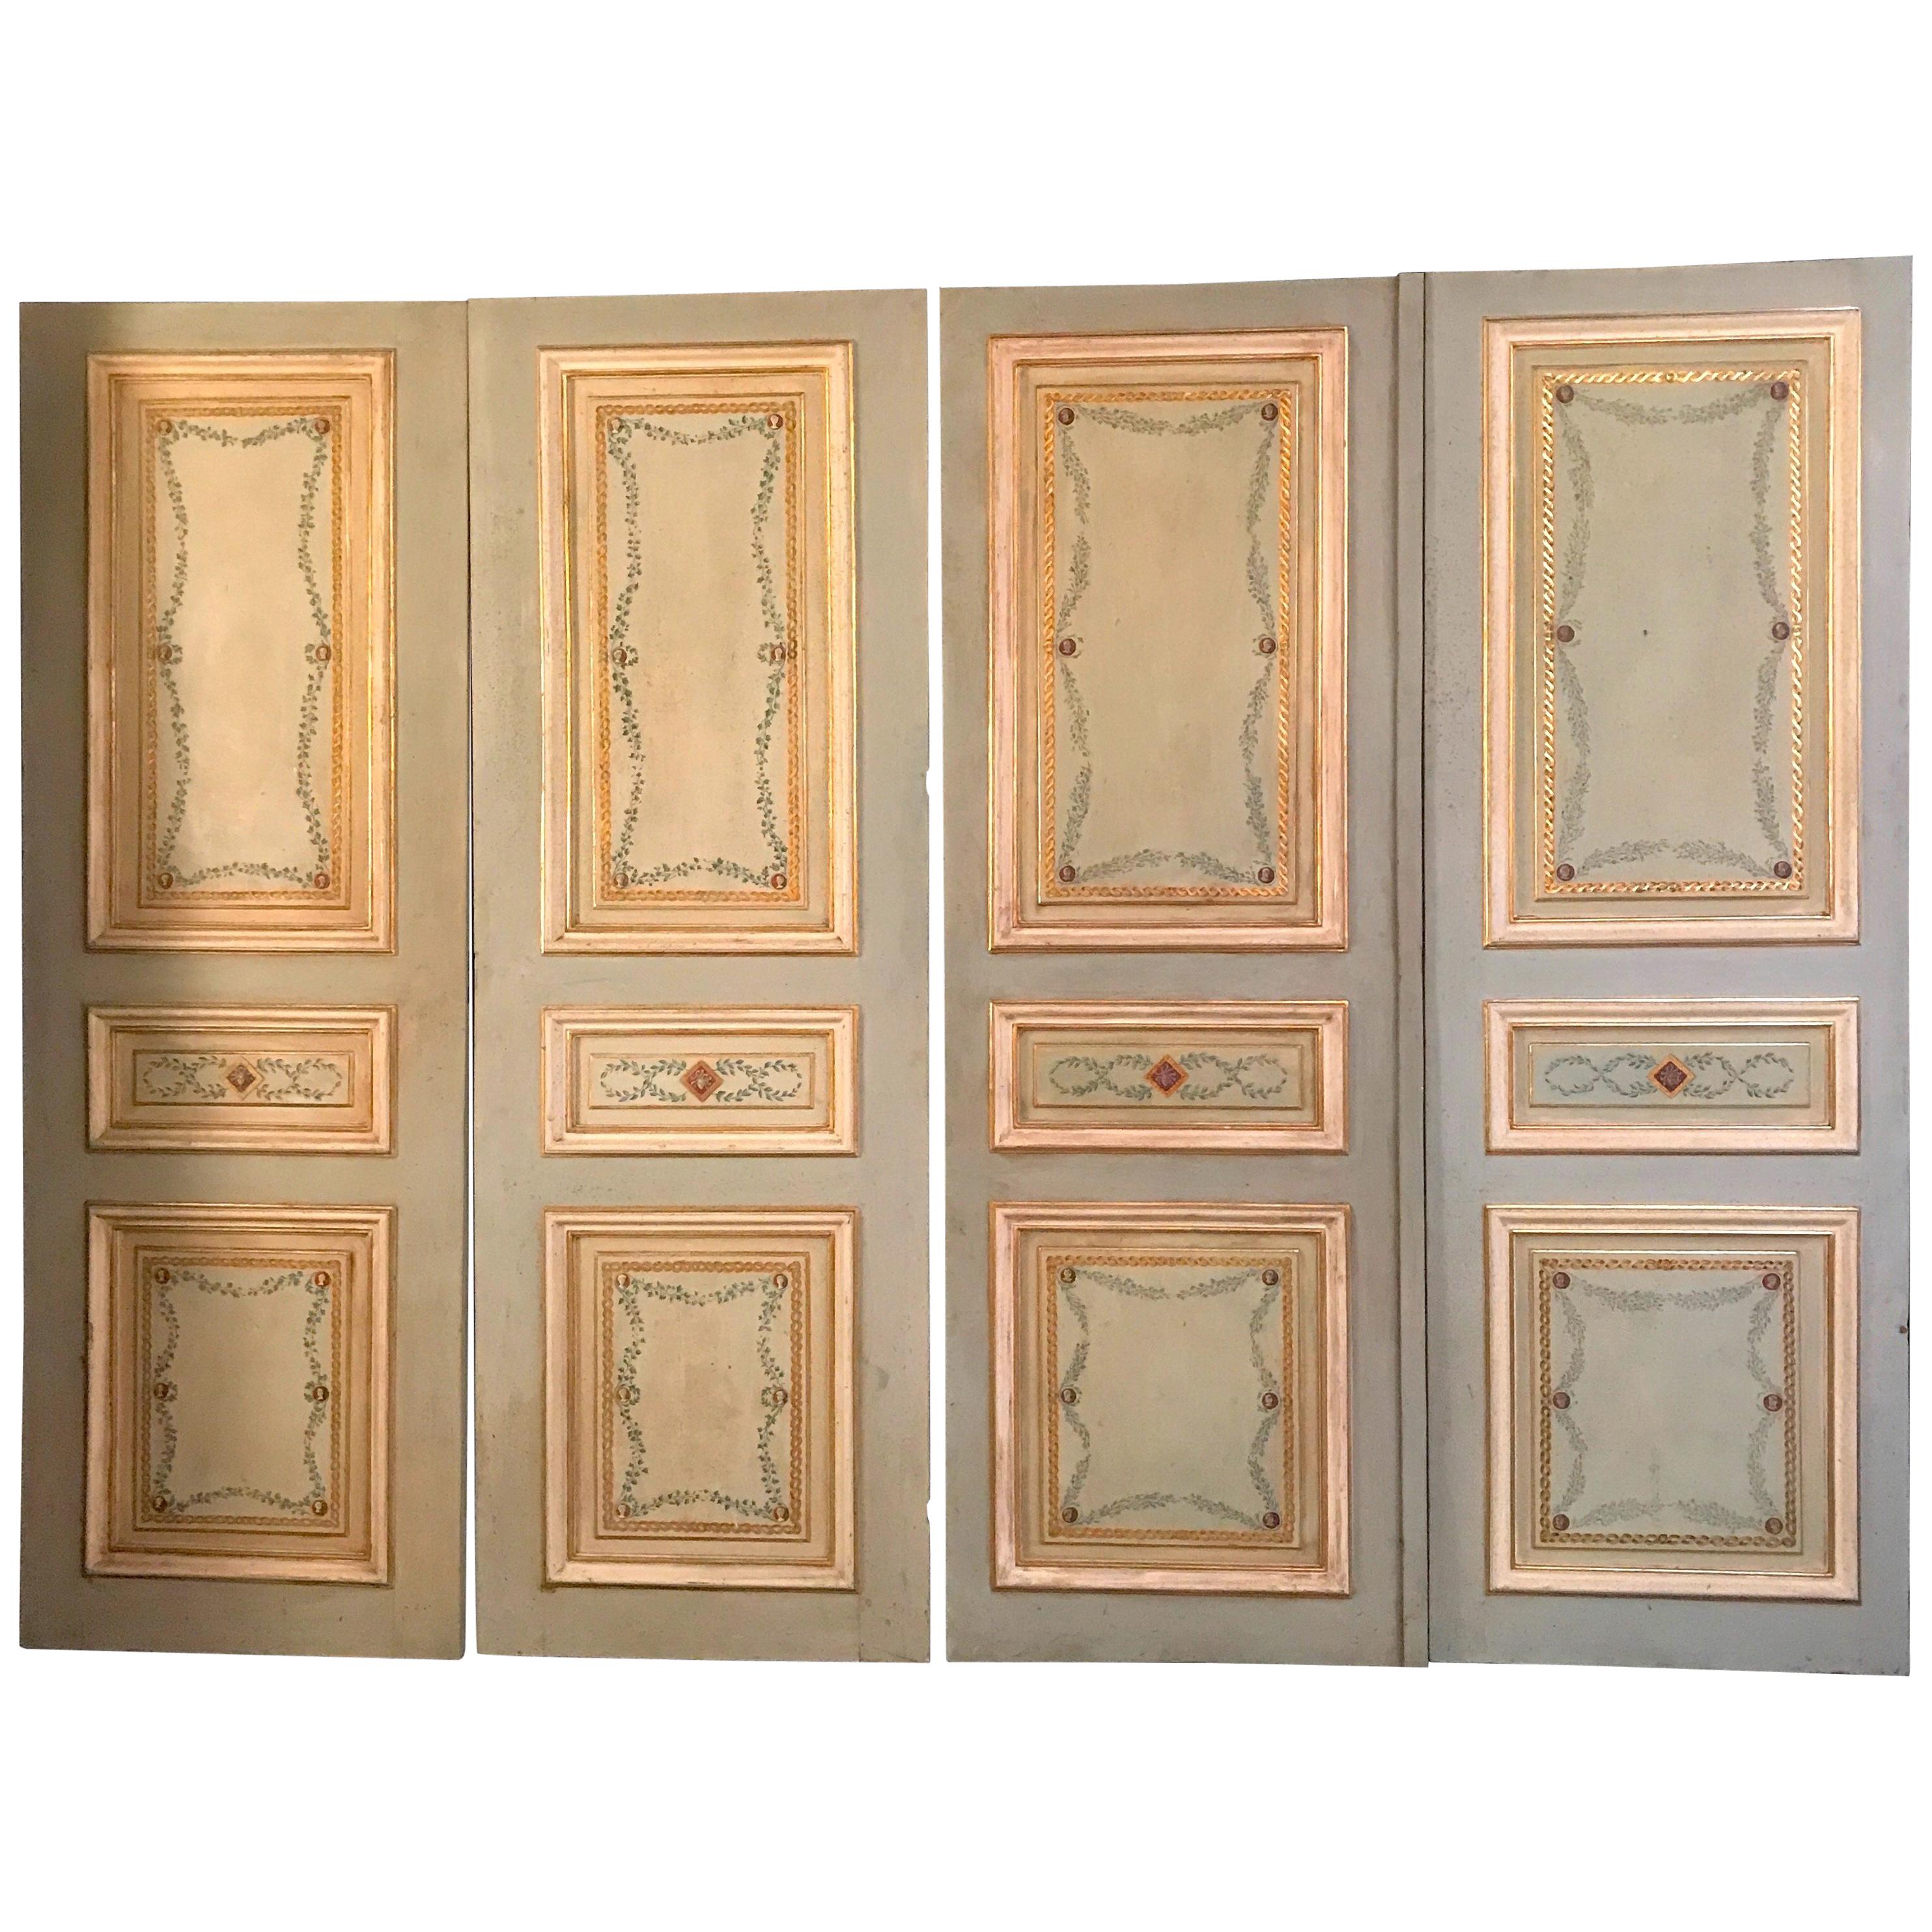 Four Pairs of 19th Century Italian Painted Doors or Panelling